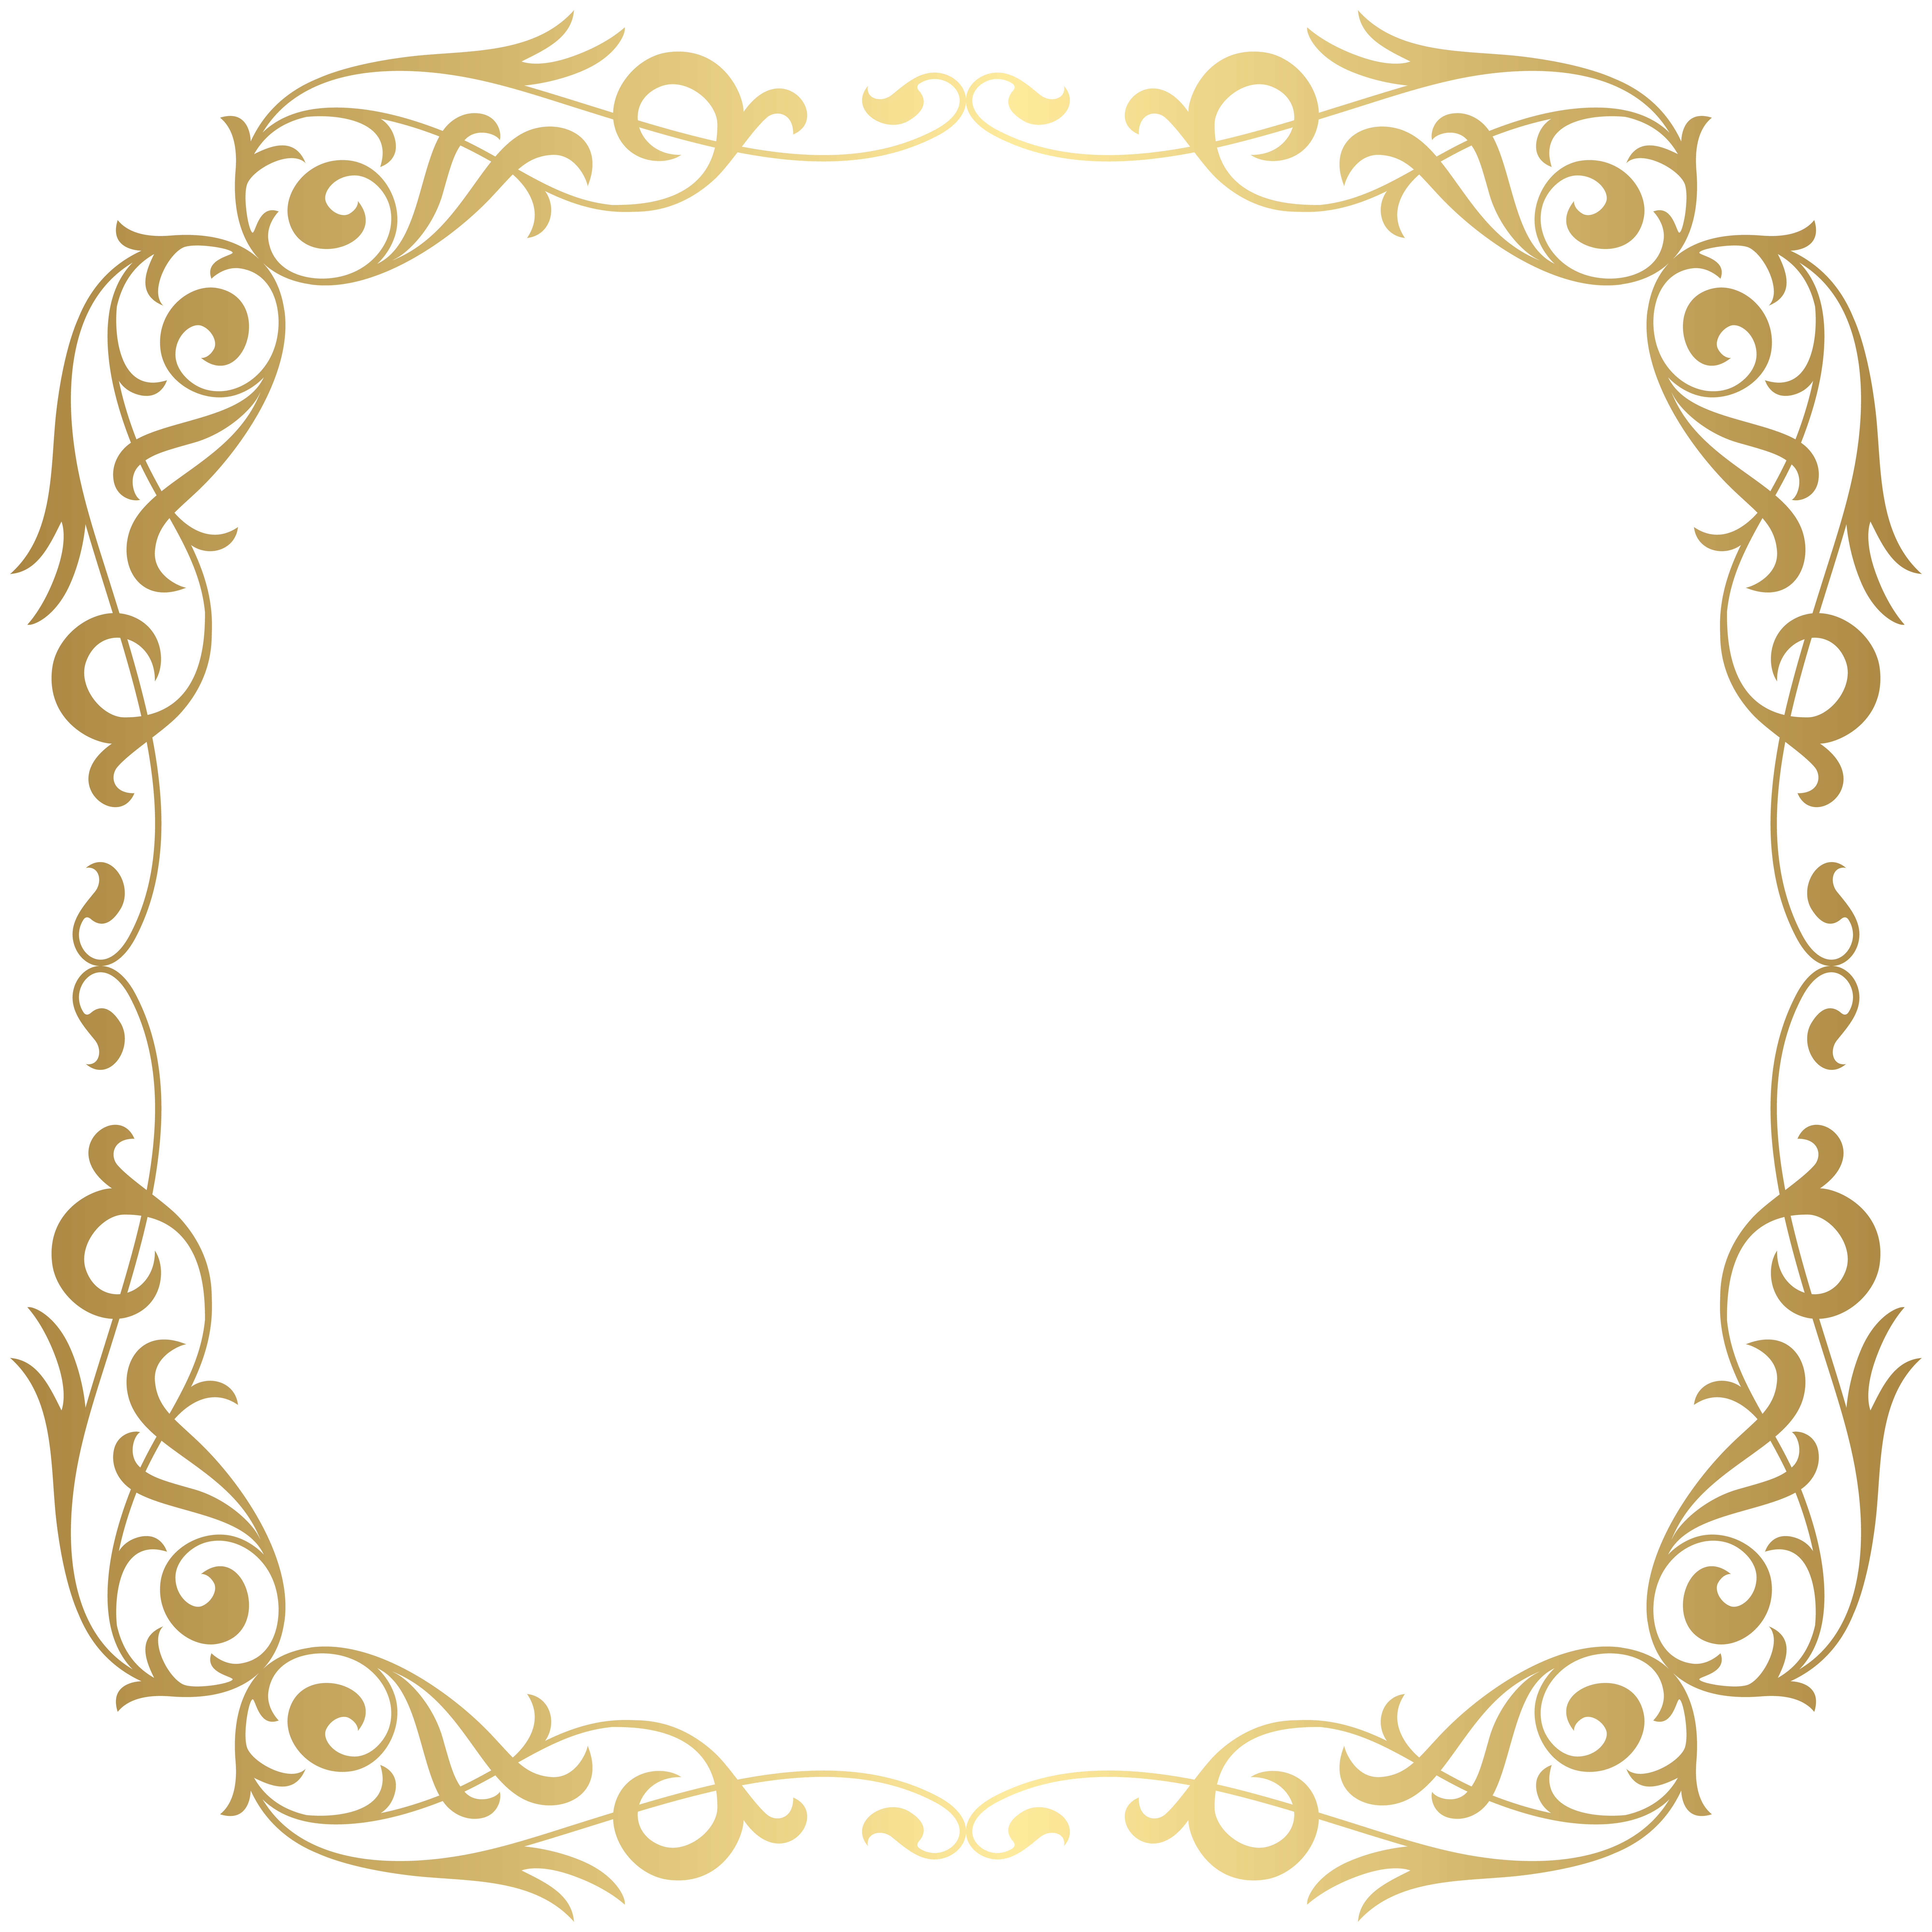 Deco Gold Frame Border | Gallery Yopriceville - High-Quality Free ...